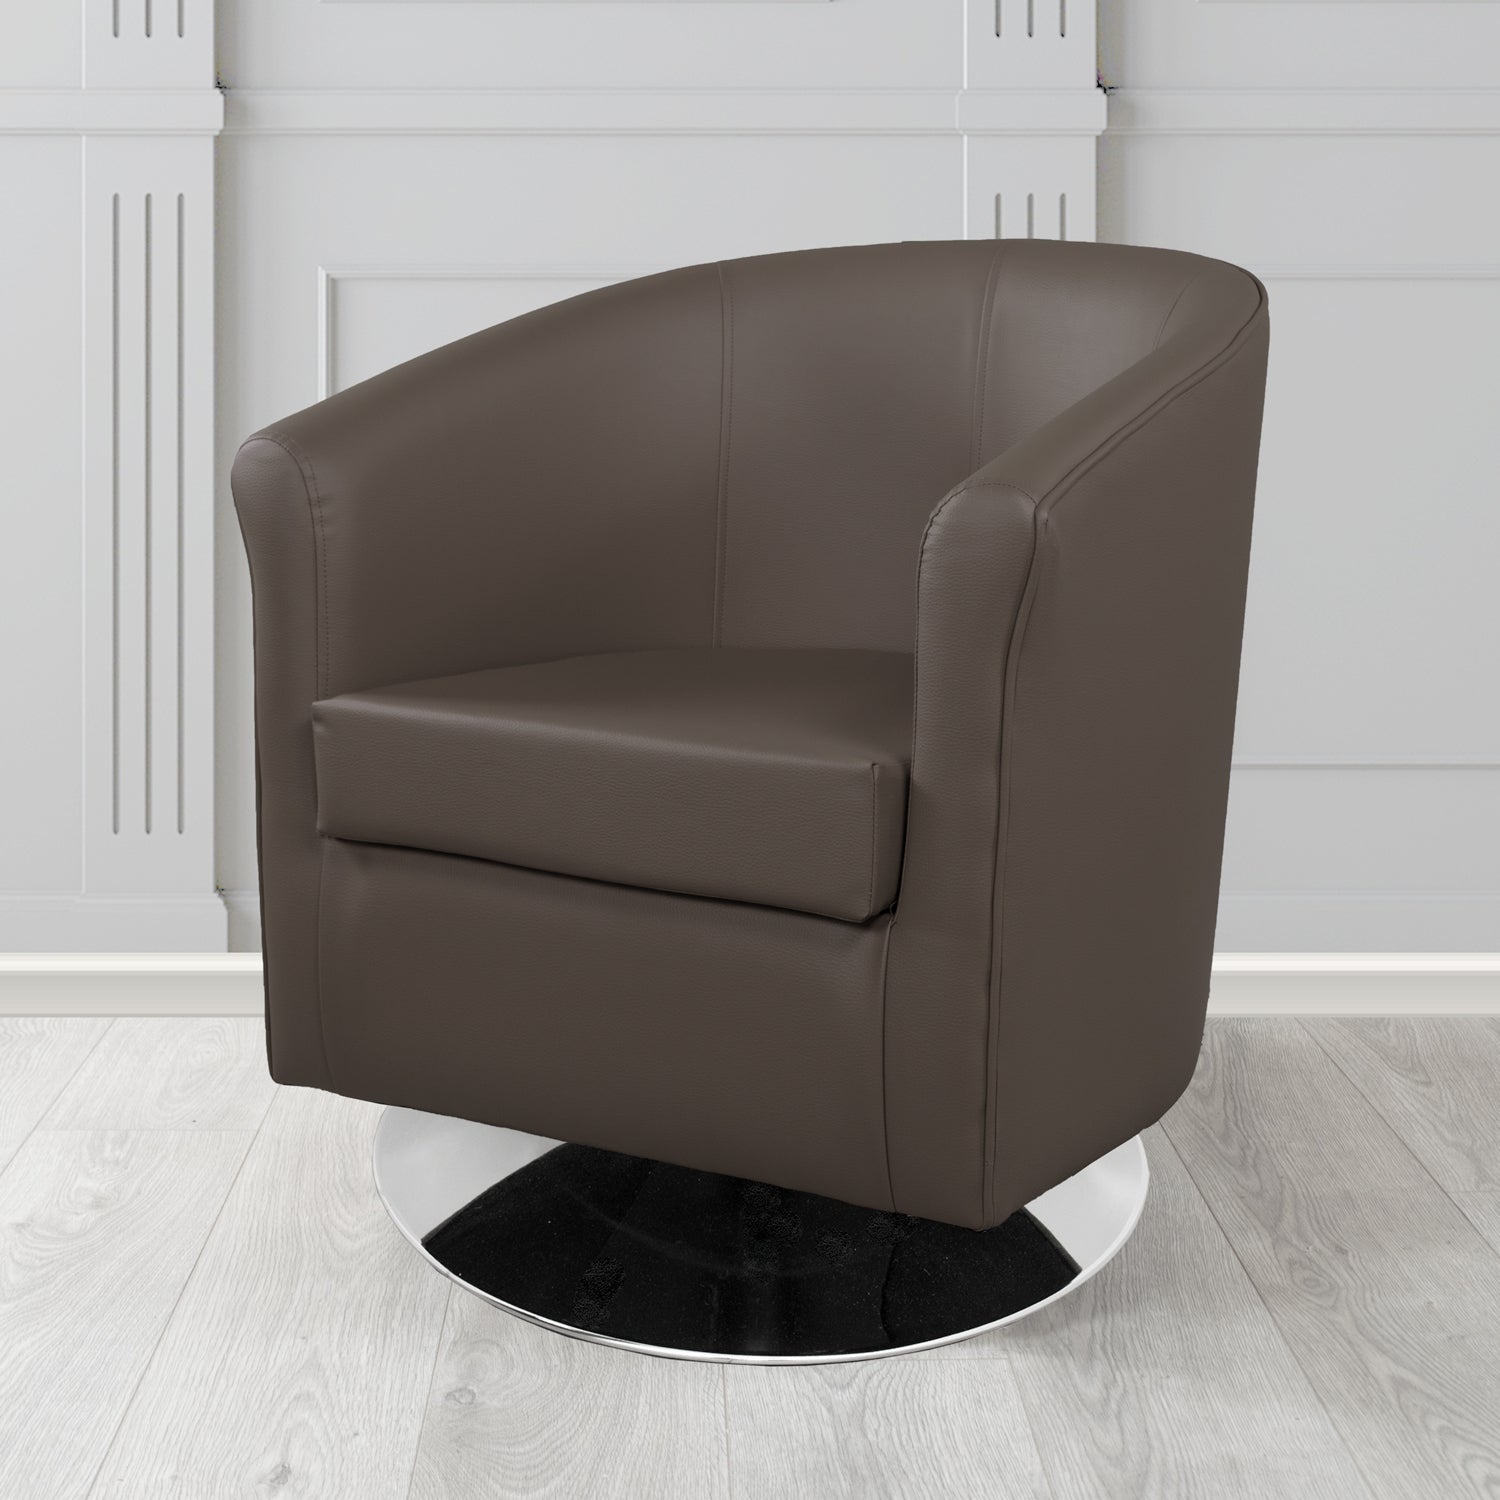 Tuscany Swivel Tub Chair in Madrid Chocolate Faux Leather - The Tub Chair Shop